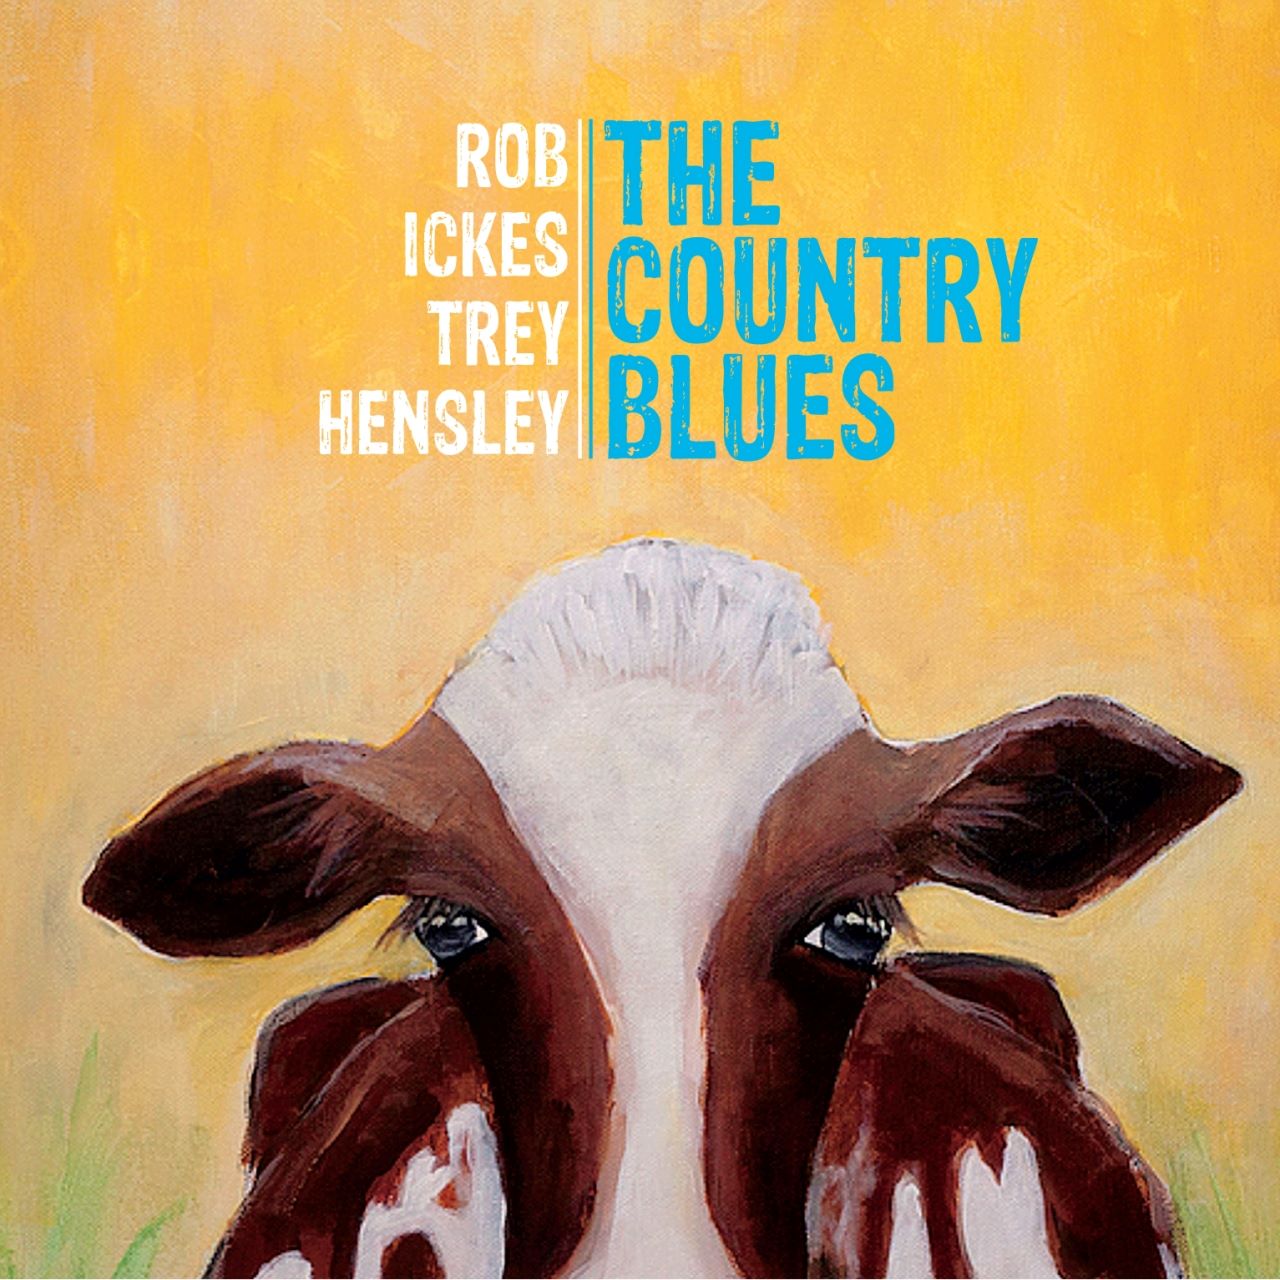 Rob Ickes & Trey Hensley - The Country Blues cover album